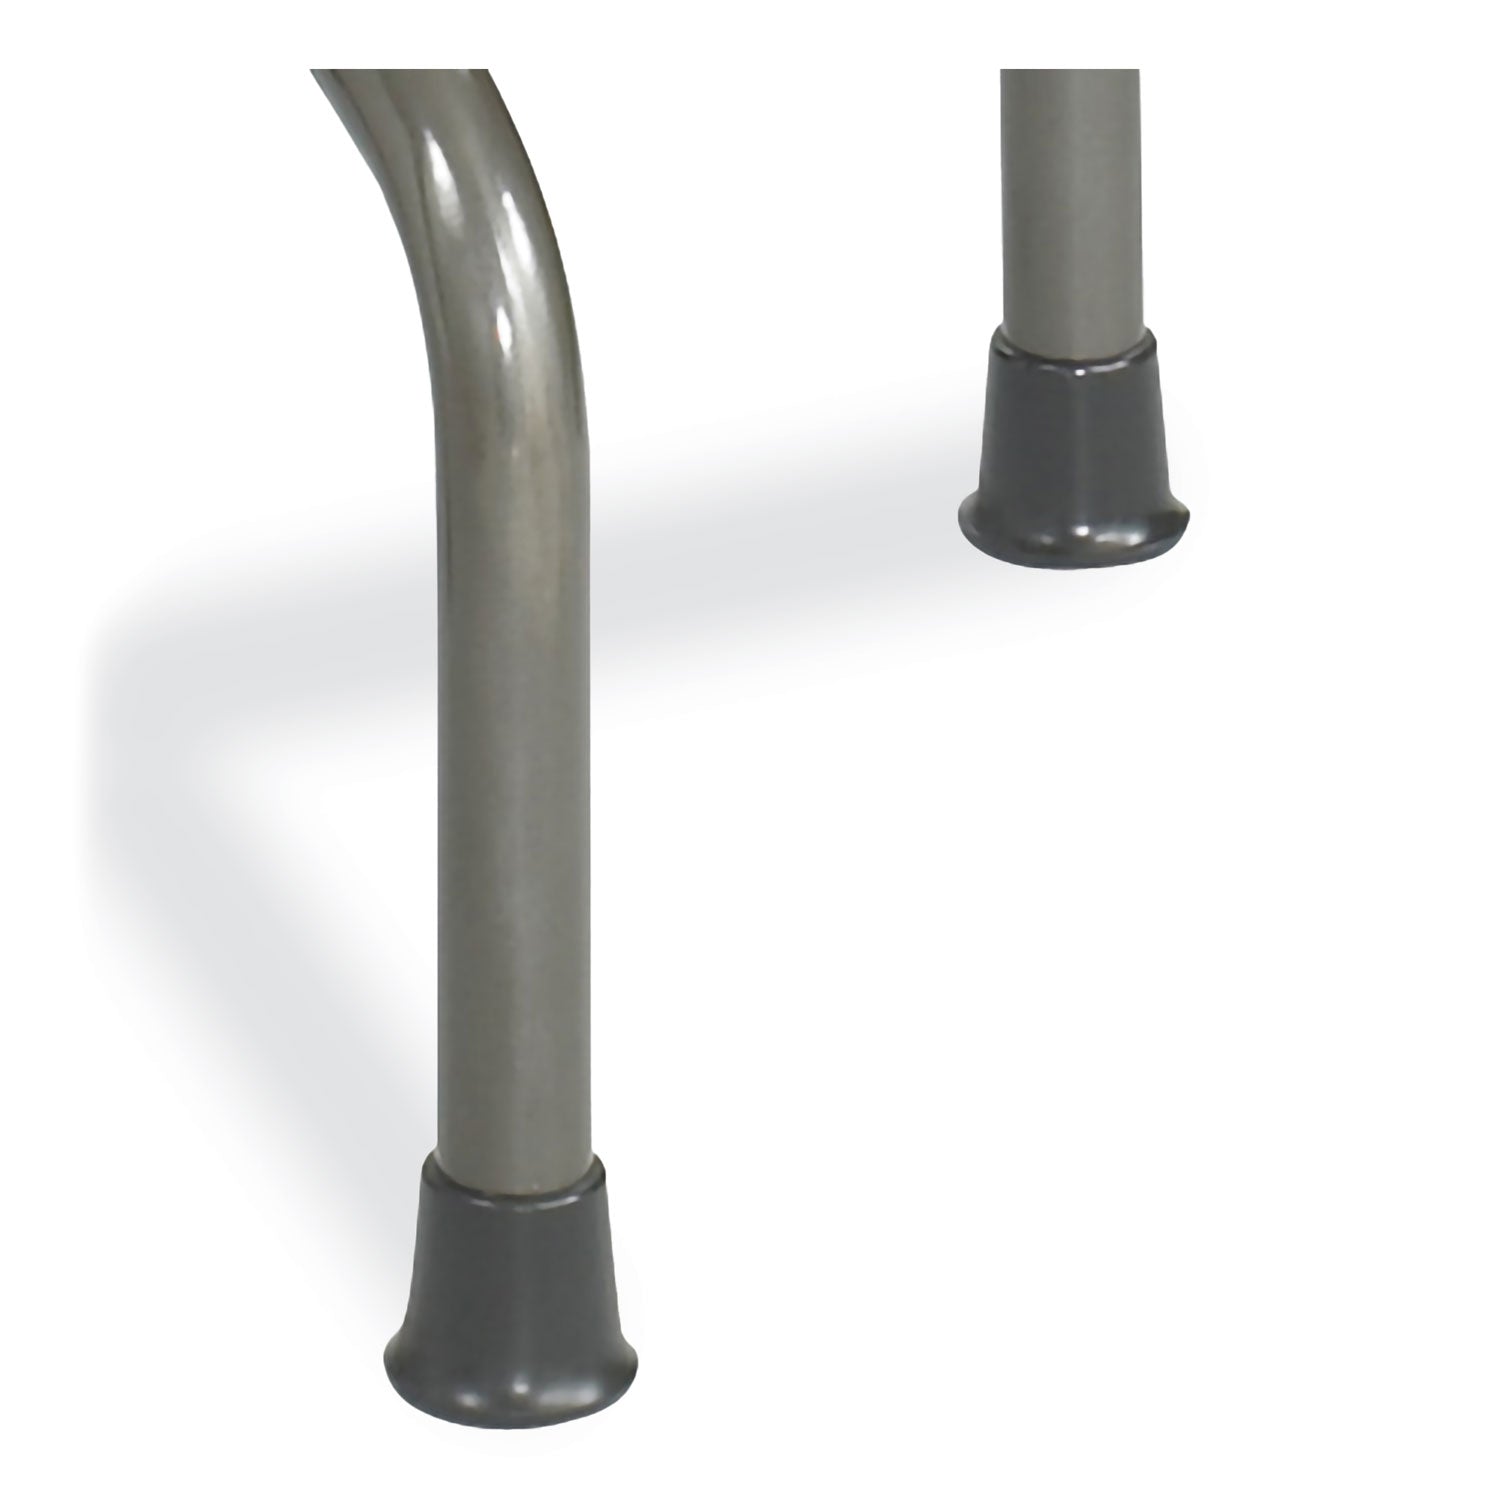 diesel-low-base-stool-backless-supports-up-to-250-lb-16-to-22-high-black-seat-pewter-base-ships-in-1-3-business-days_saf6669 - 2